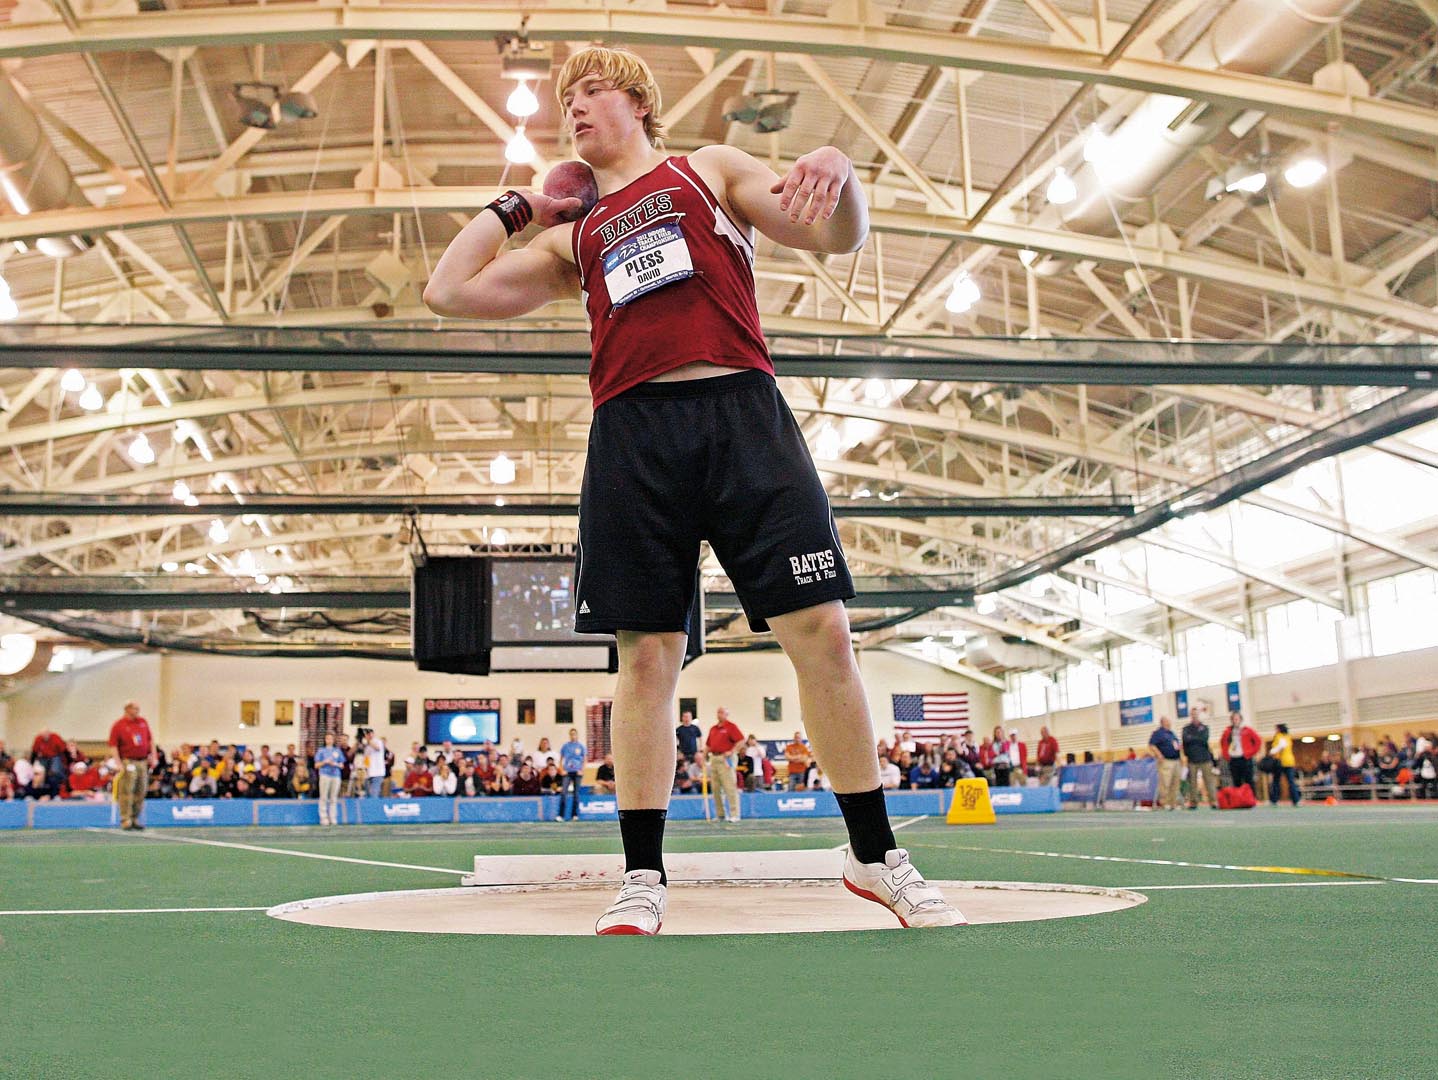 David Pless ’13 prepares to throw the shot, en route to winning his second consecutive NCAA Division III indoor title in 2012 and breaking the NCAA Division III Indoor record by 9.5 inches. Photograph by Stephen Mally/NCAA.